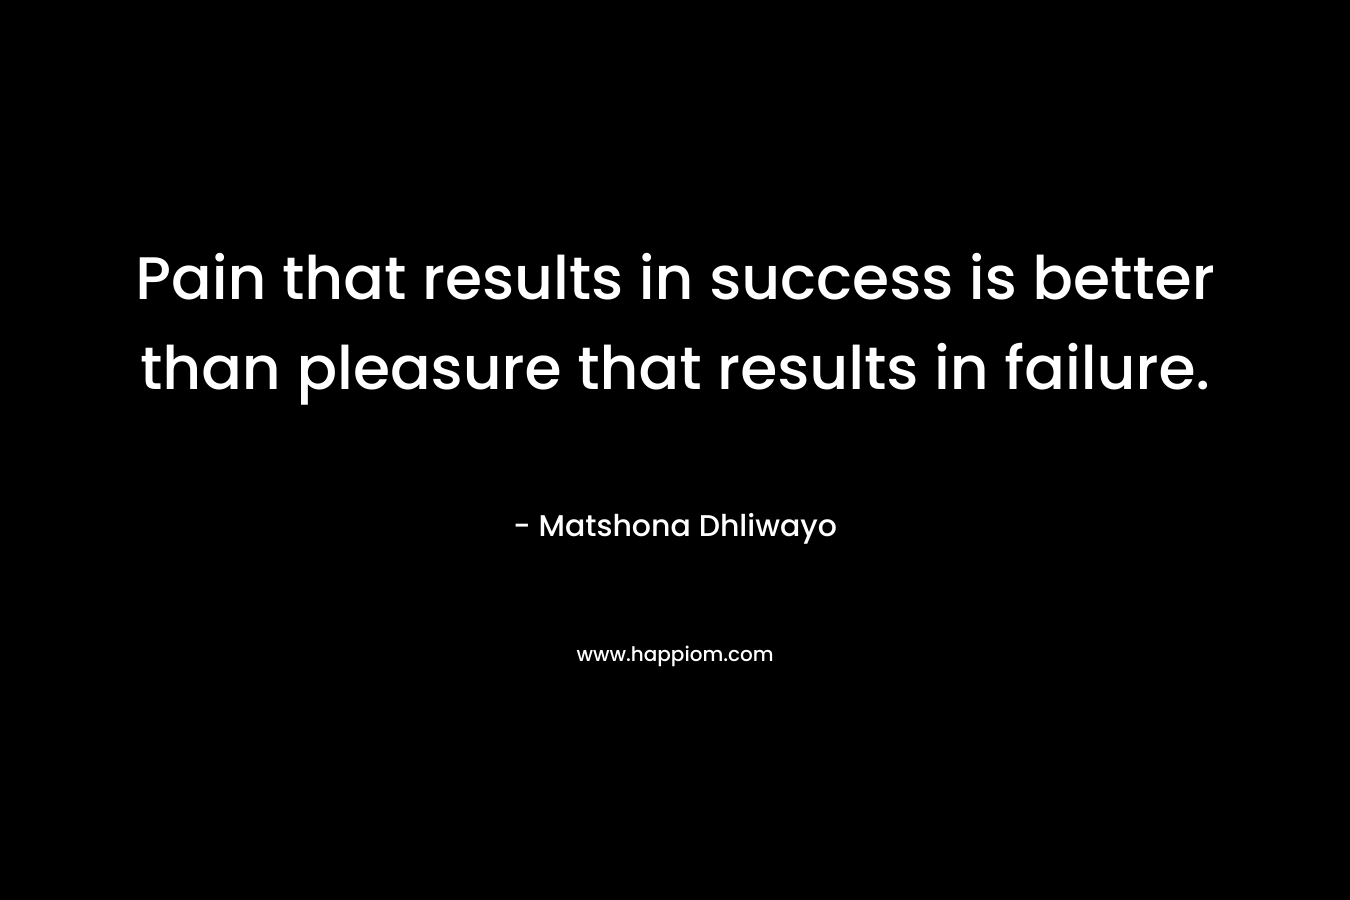 Pain that results in success is better than pleasure that results in failure.